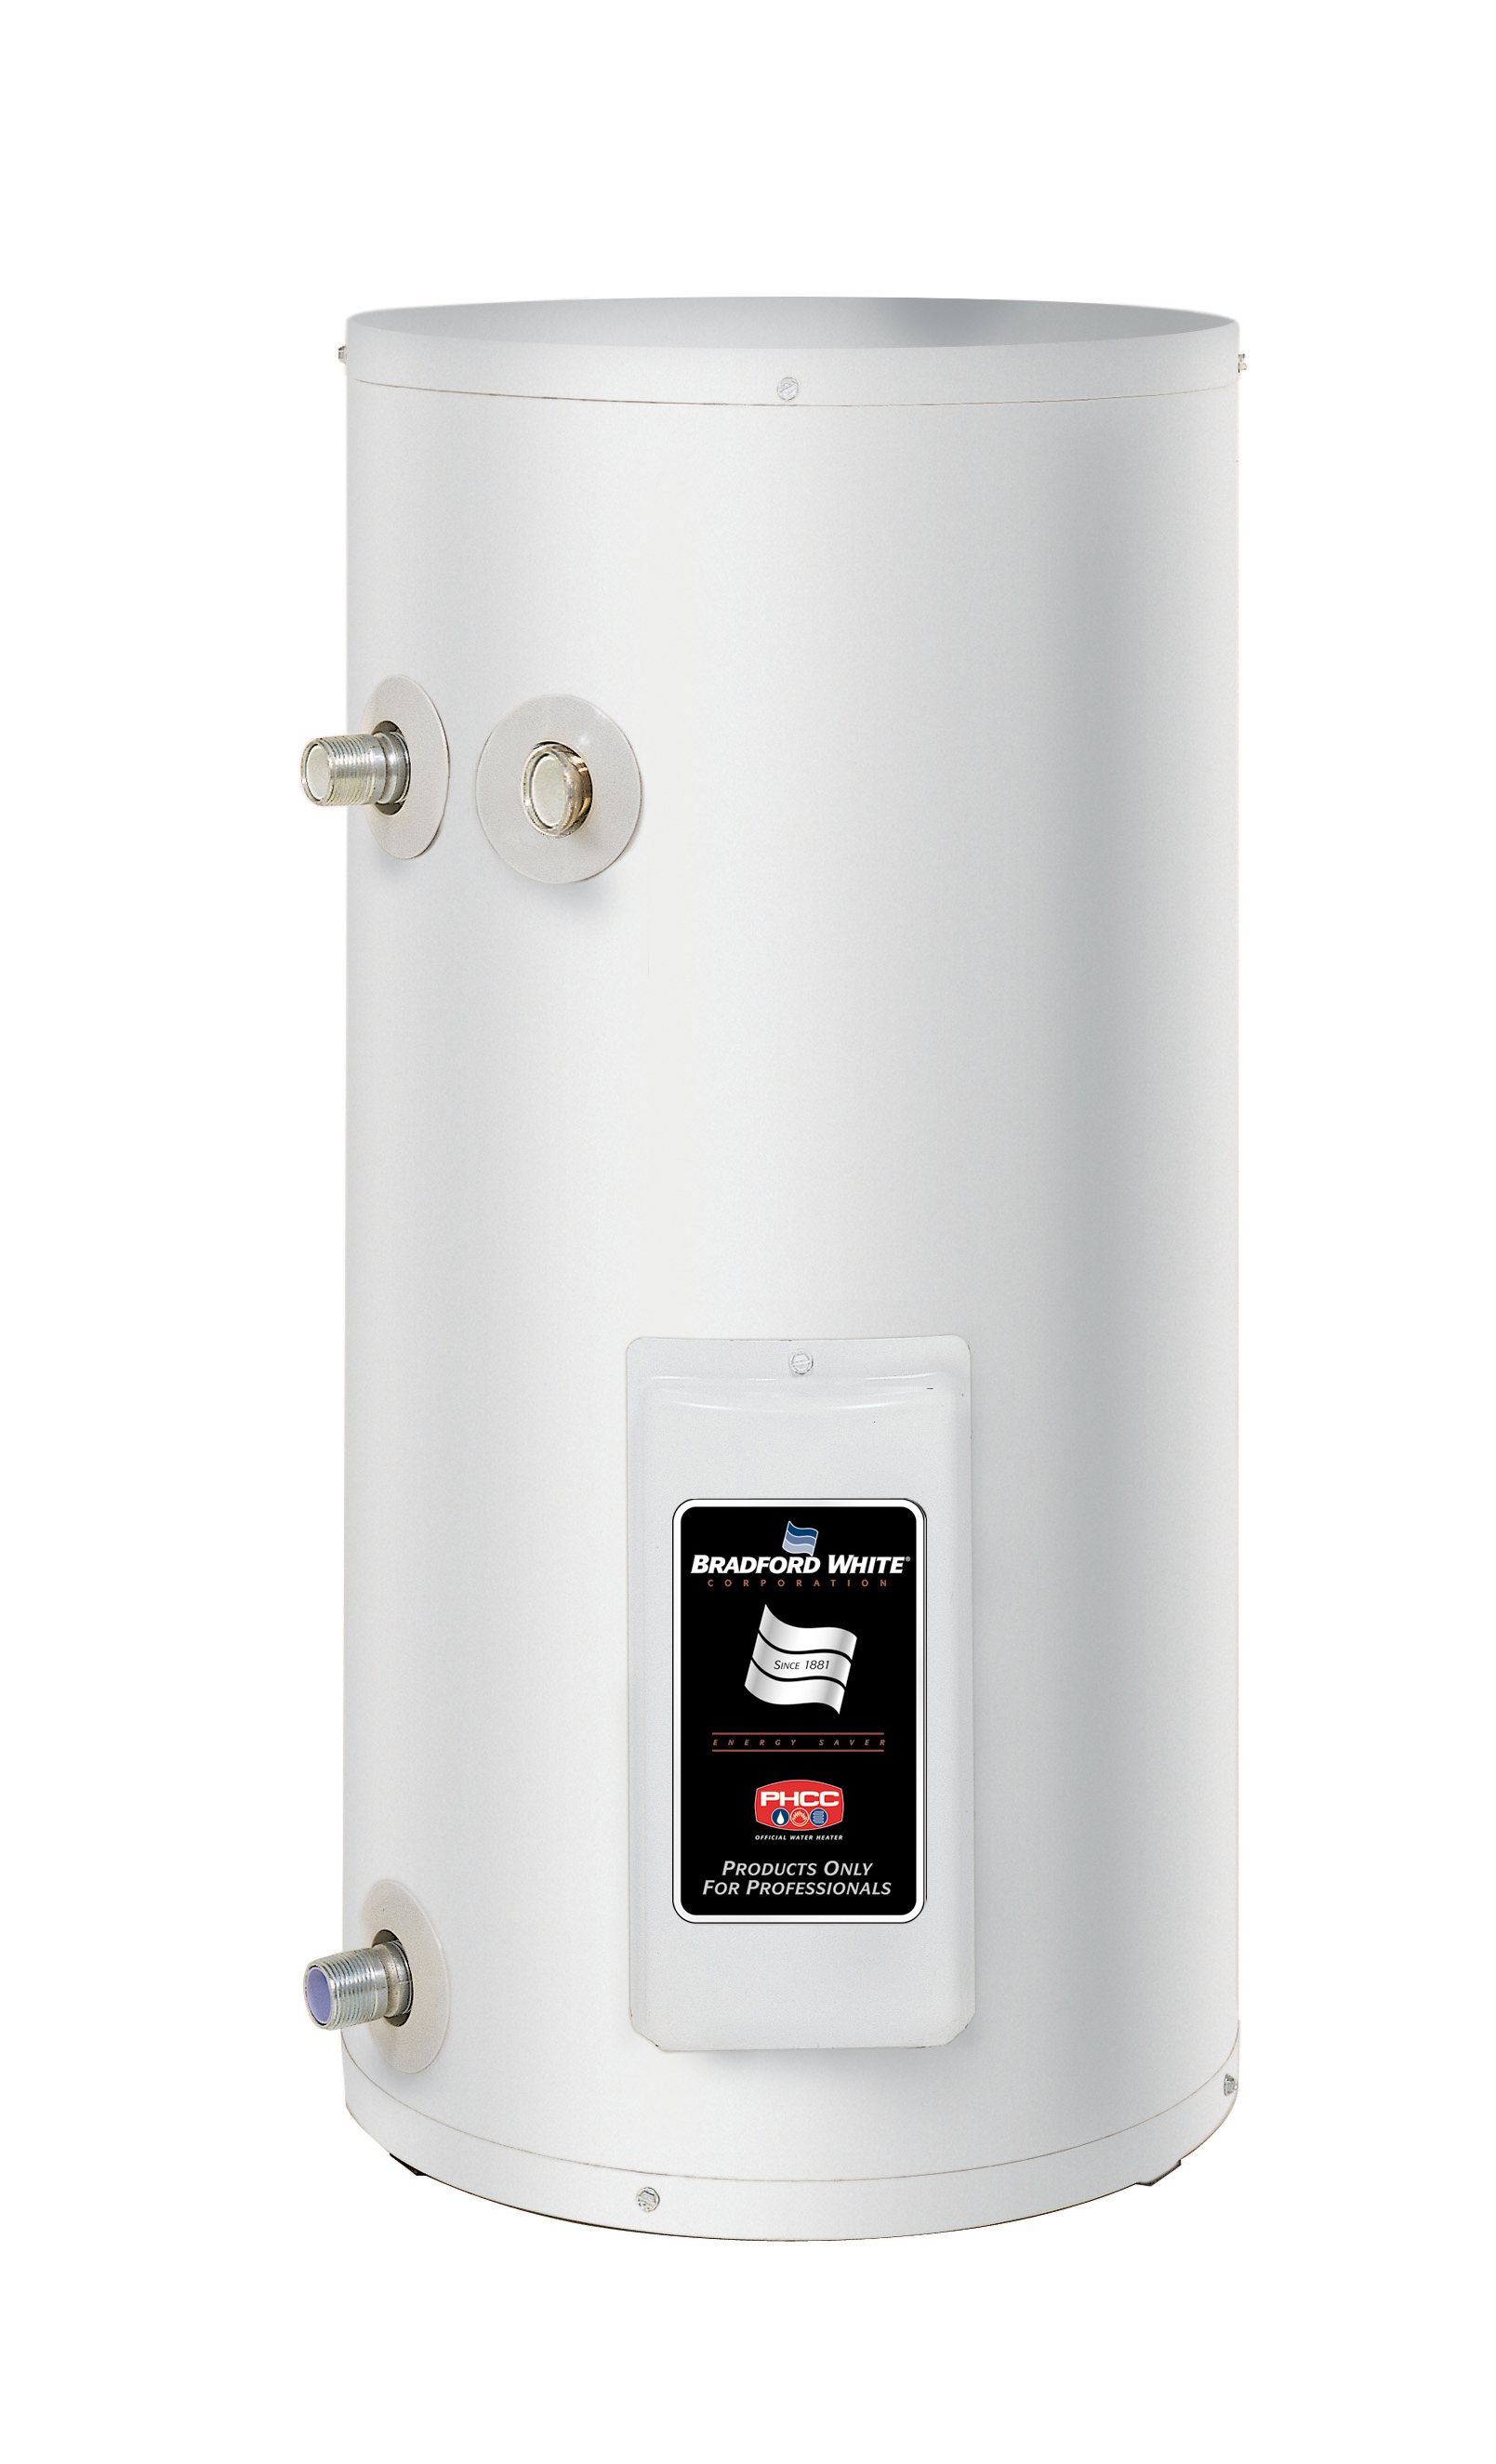 bradford-white-residential-water-heaters-utility-electric-models